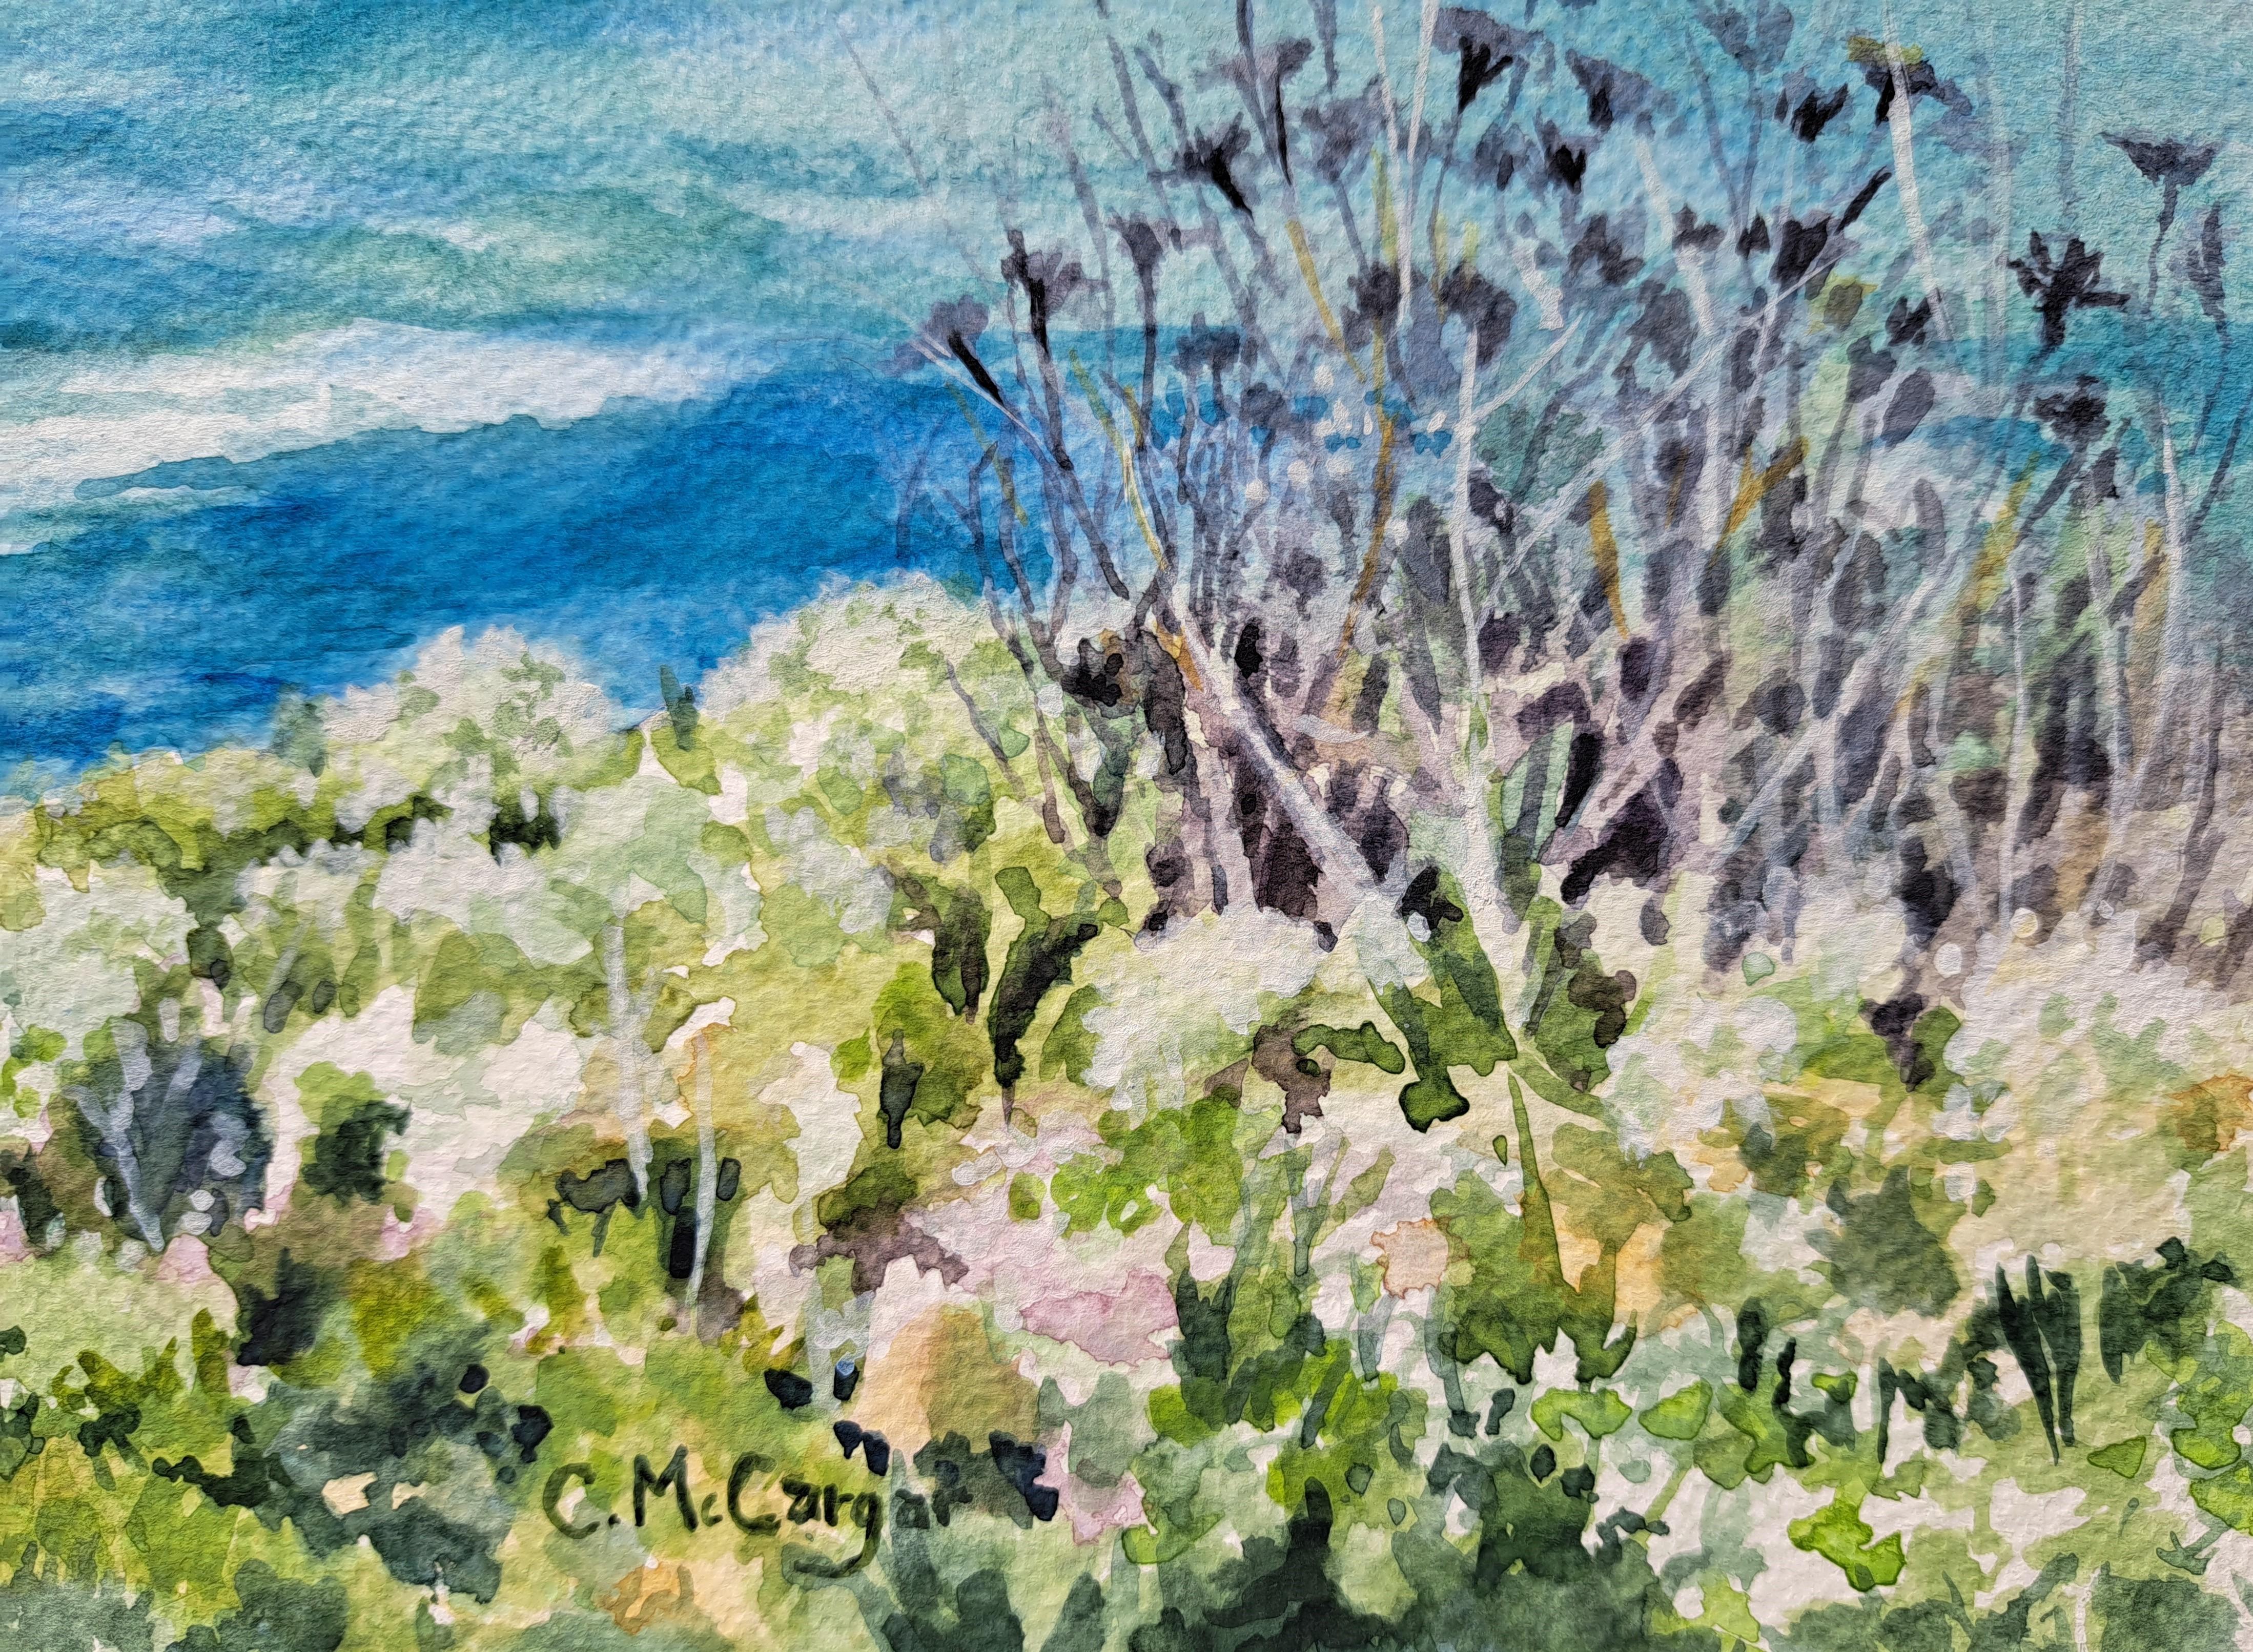 <p>Artist Comments<br>Artist Catherine McCargar shares a soothing scene of the Pacific Ocean skirting along the verdant coast. Invigorating frothy waves waves rhythmically glide in and out of the tranquil display. The lush cliffside flora